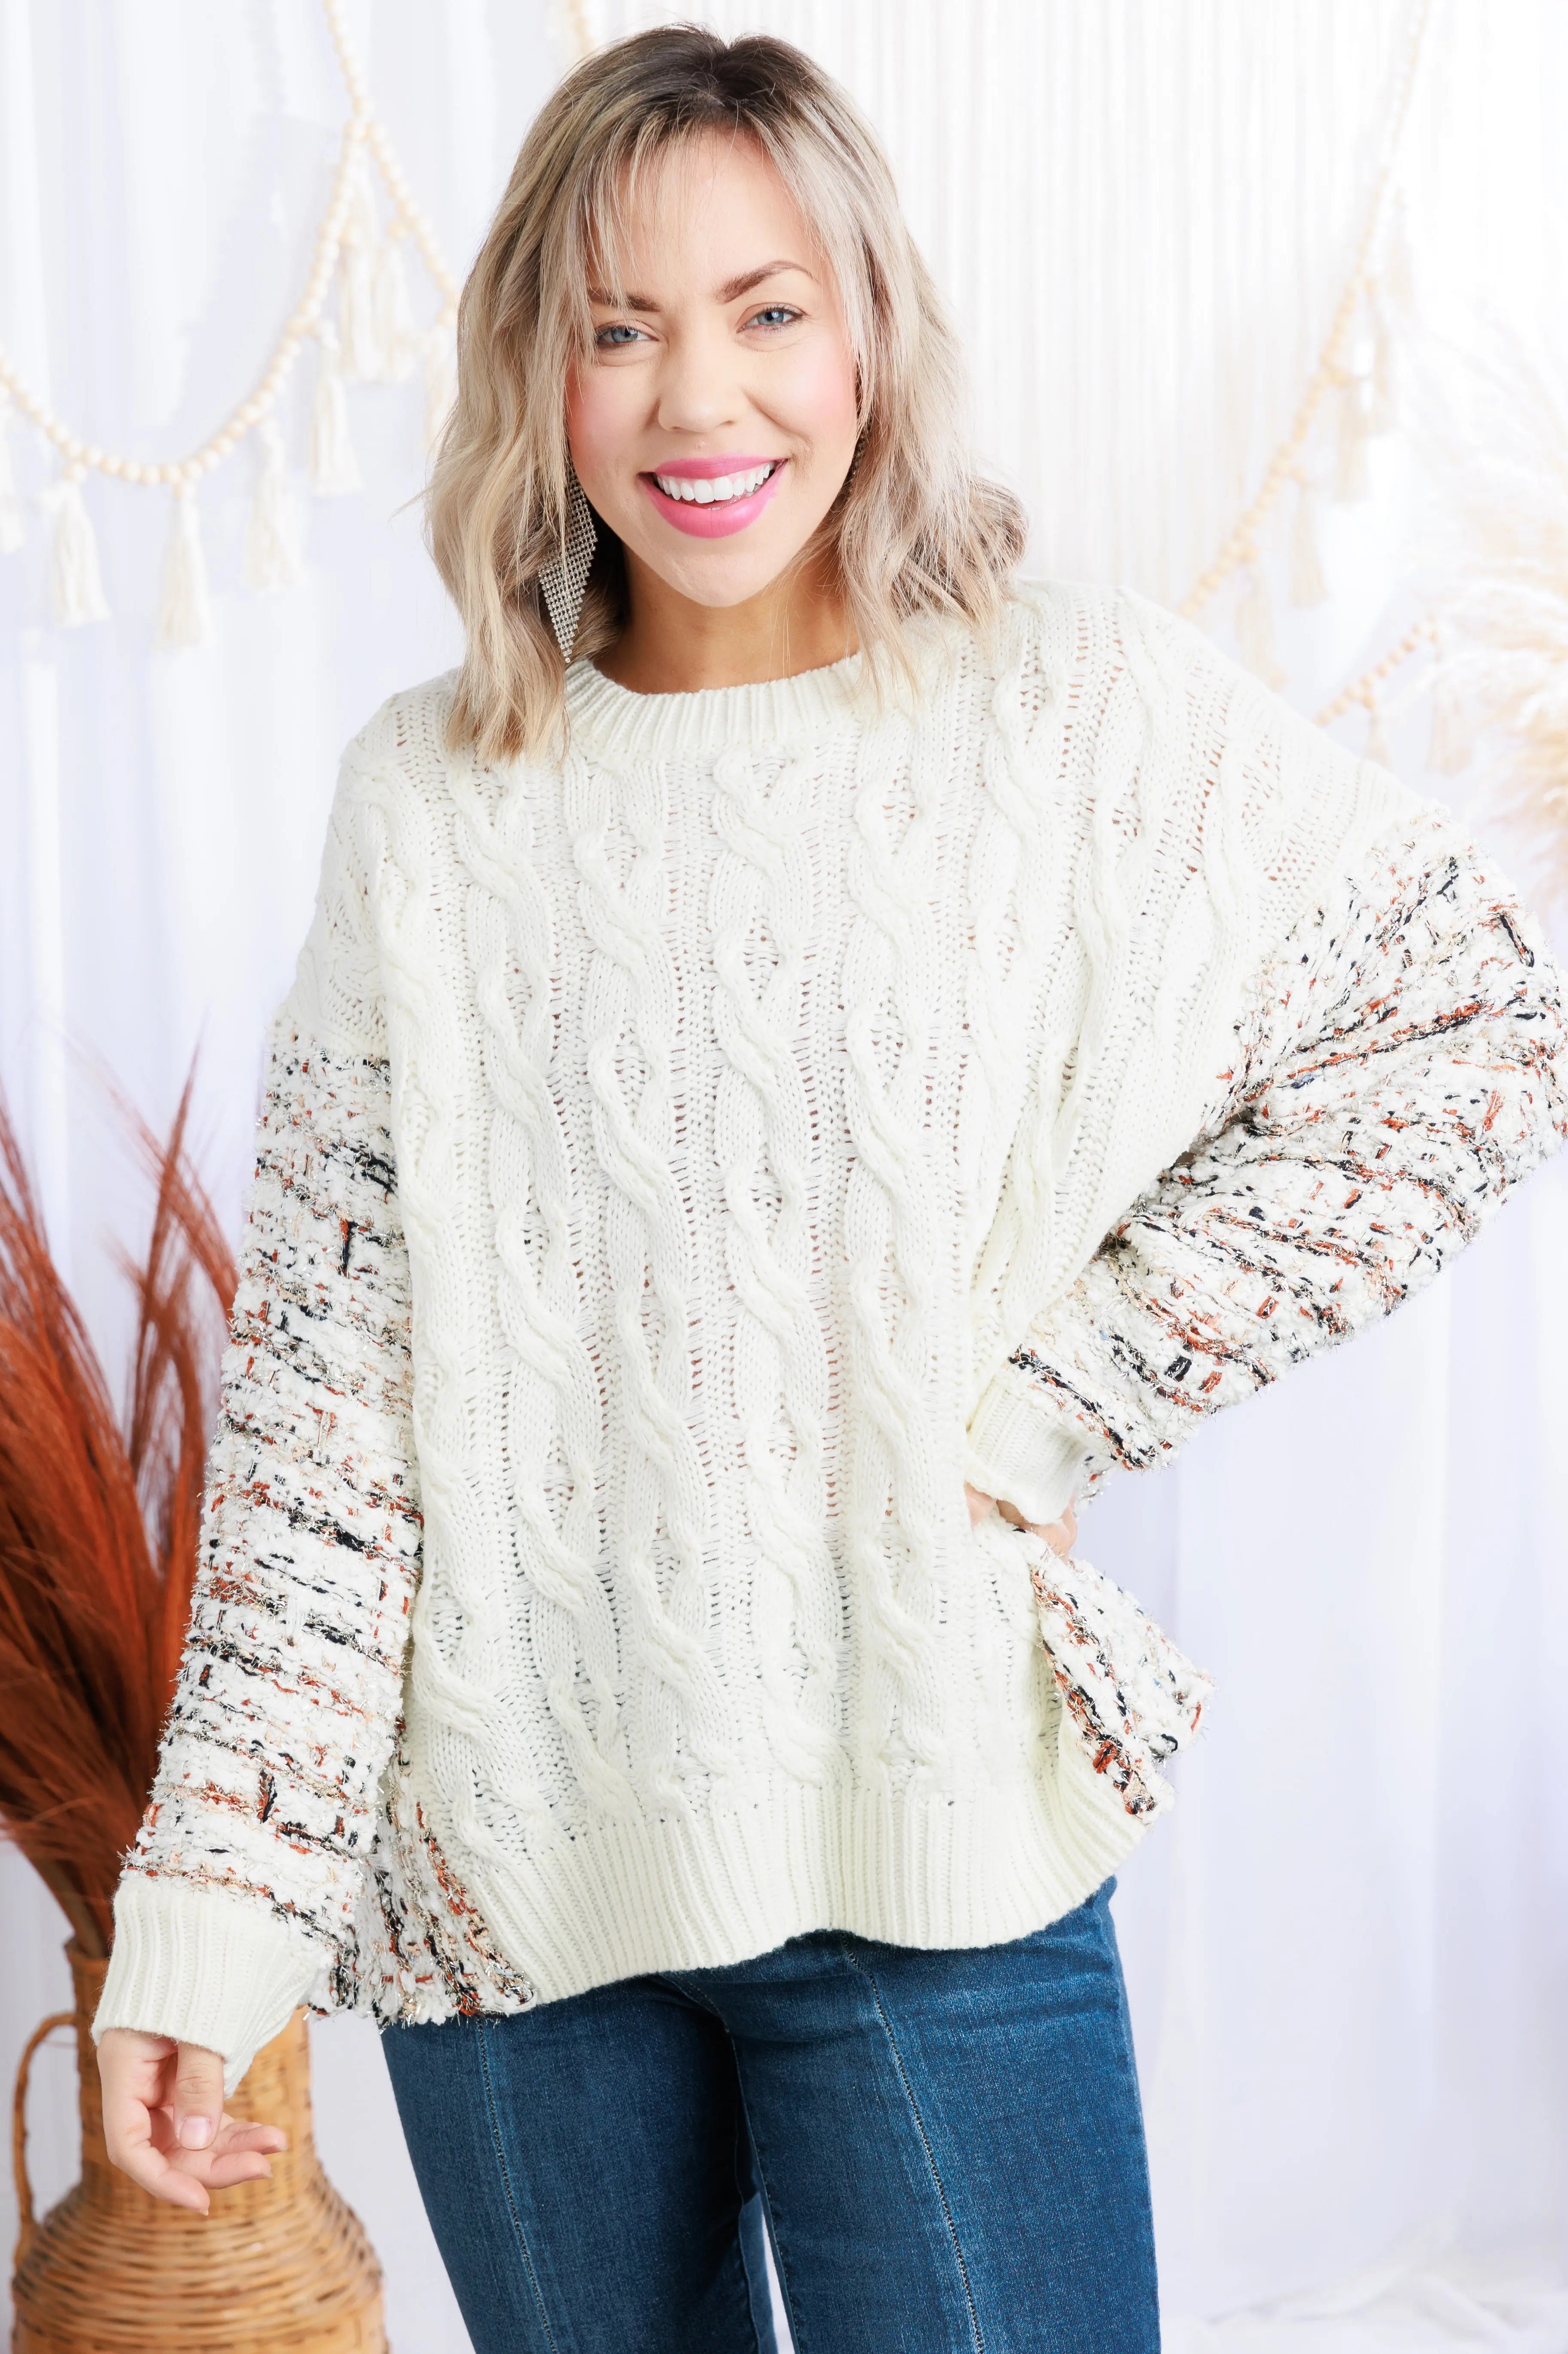 You've Got That Glow - Sweater Boutique Simplified